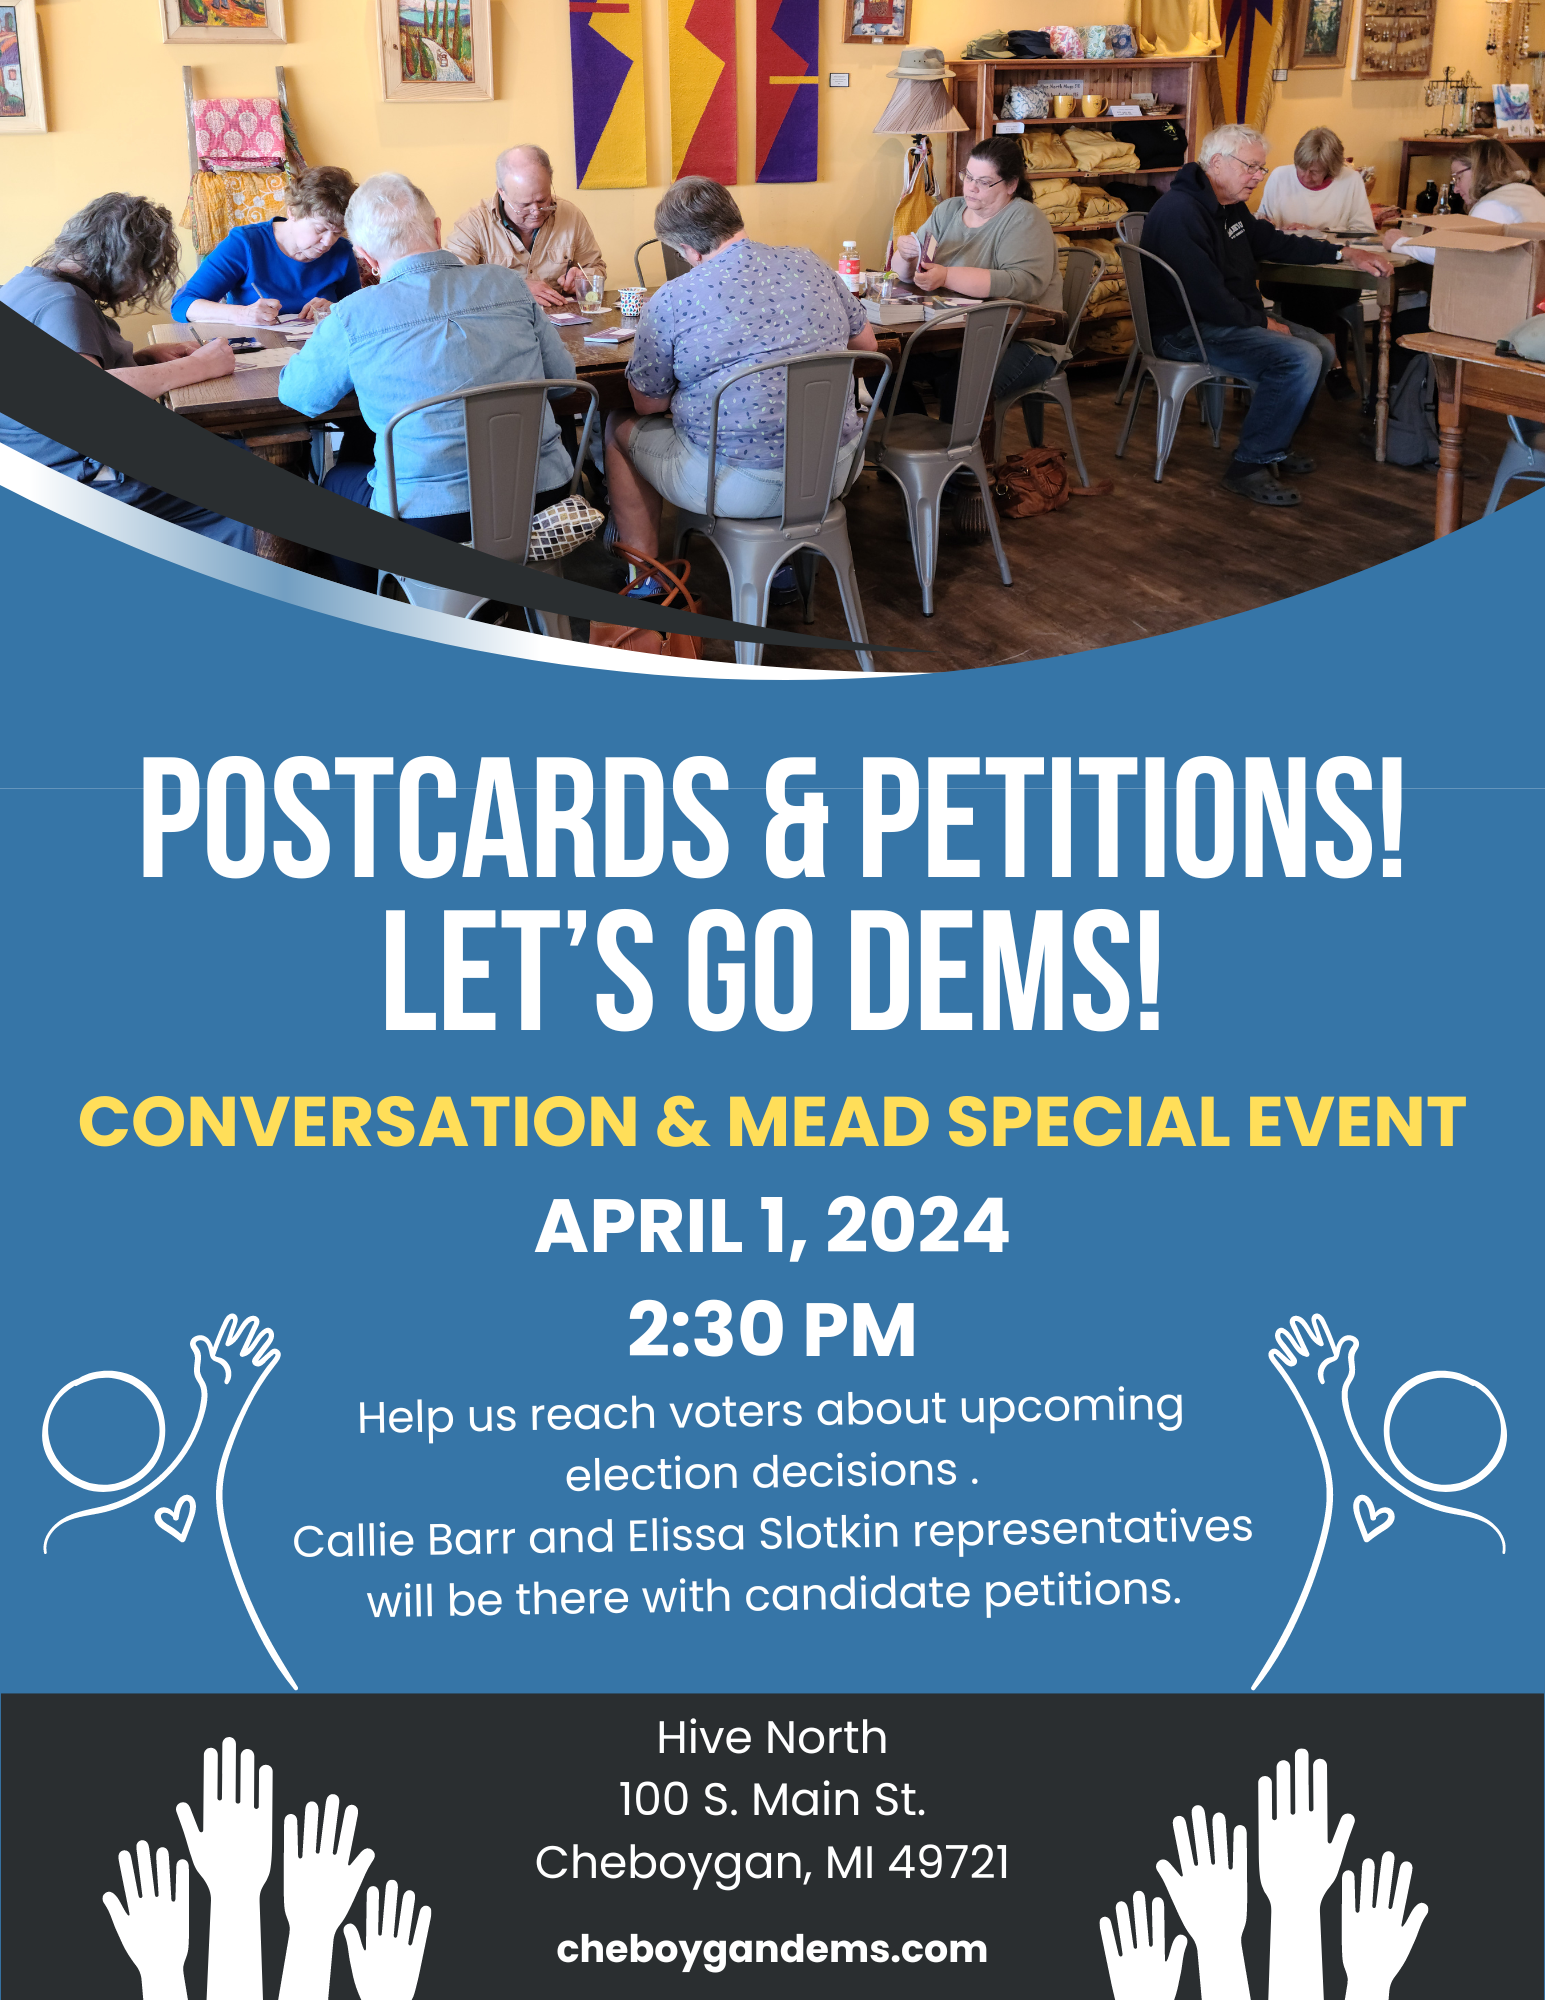 Postcards & Petitions